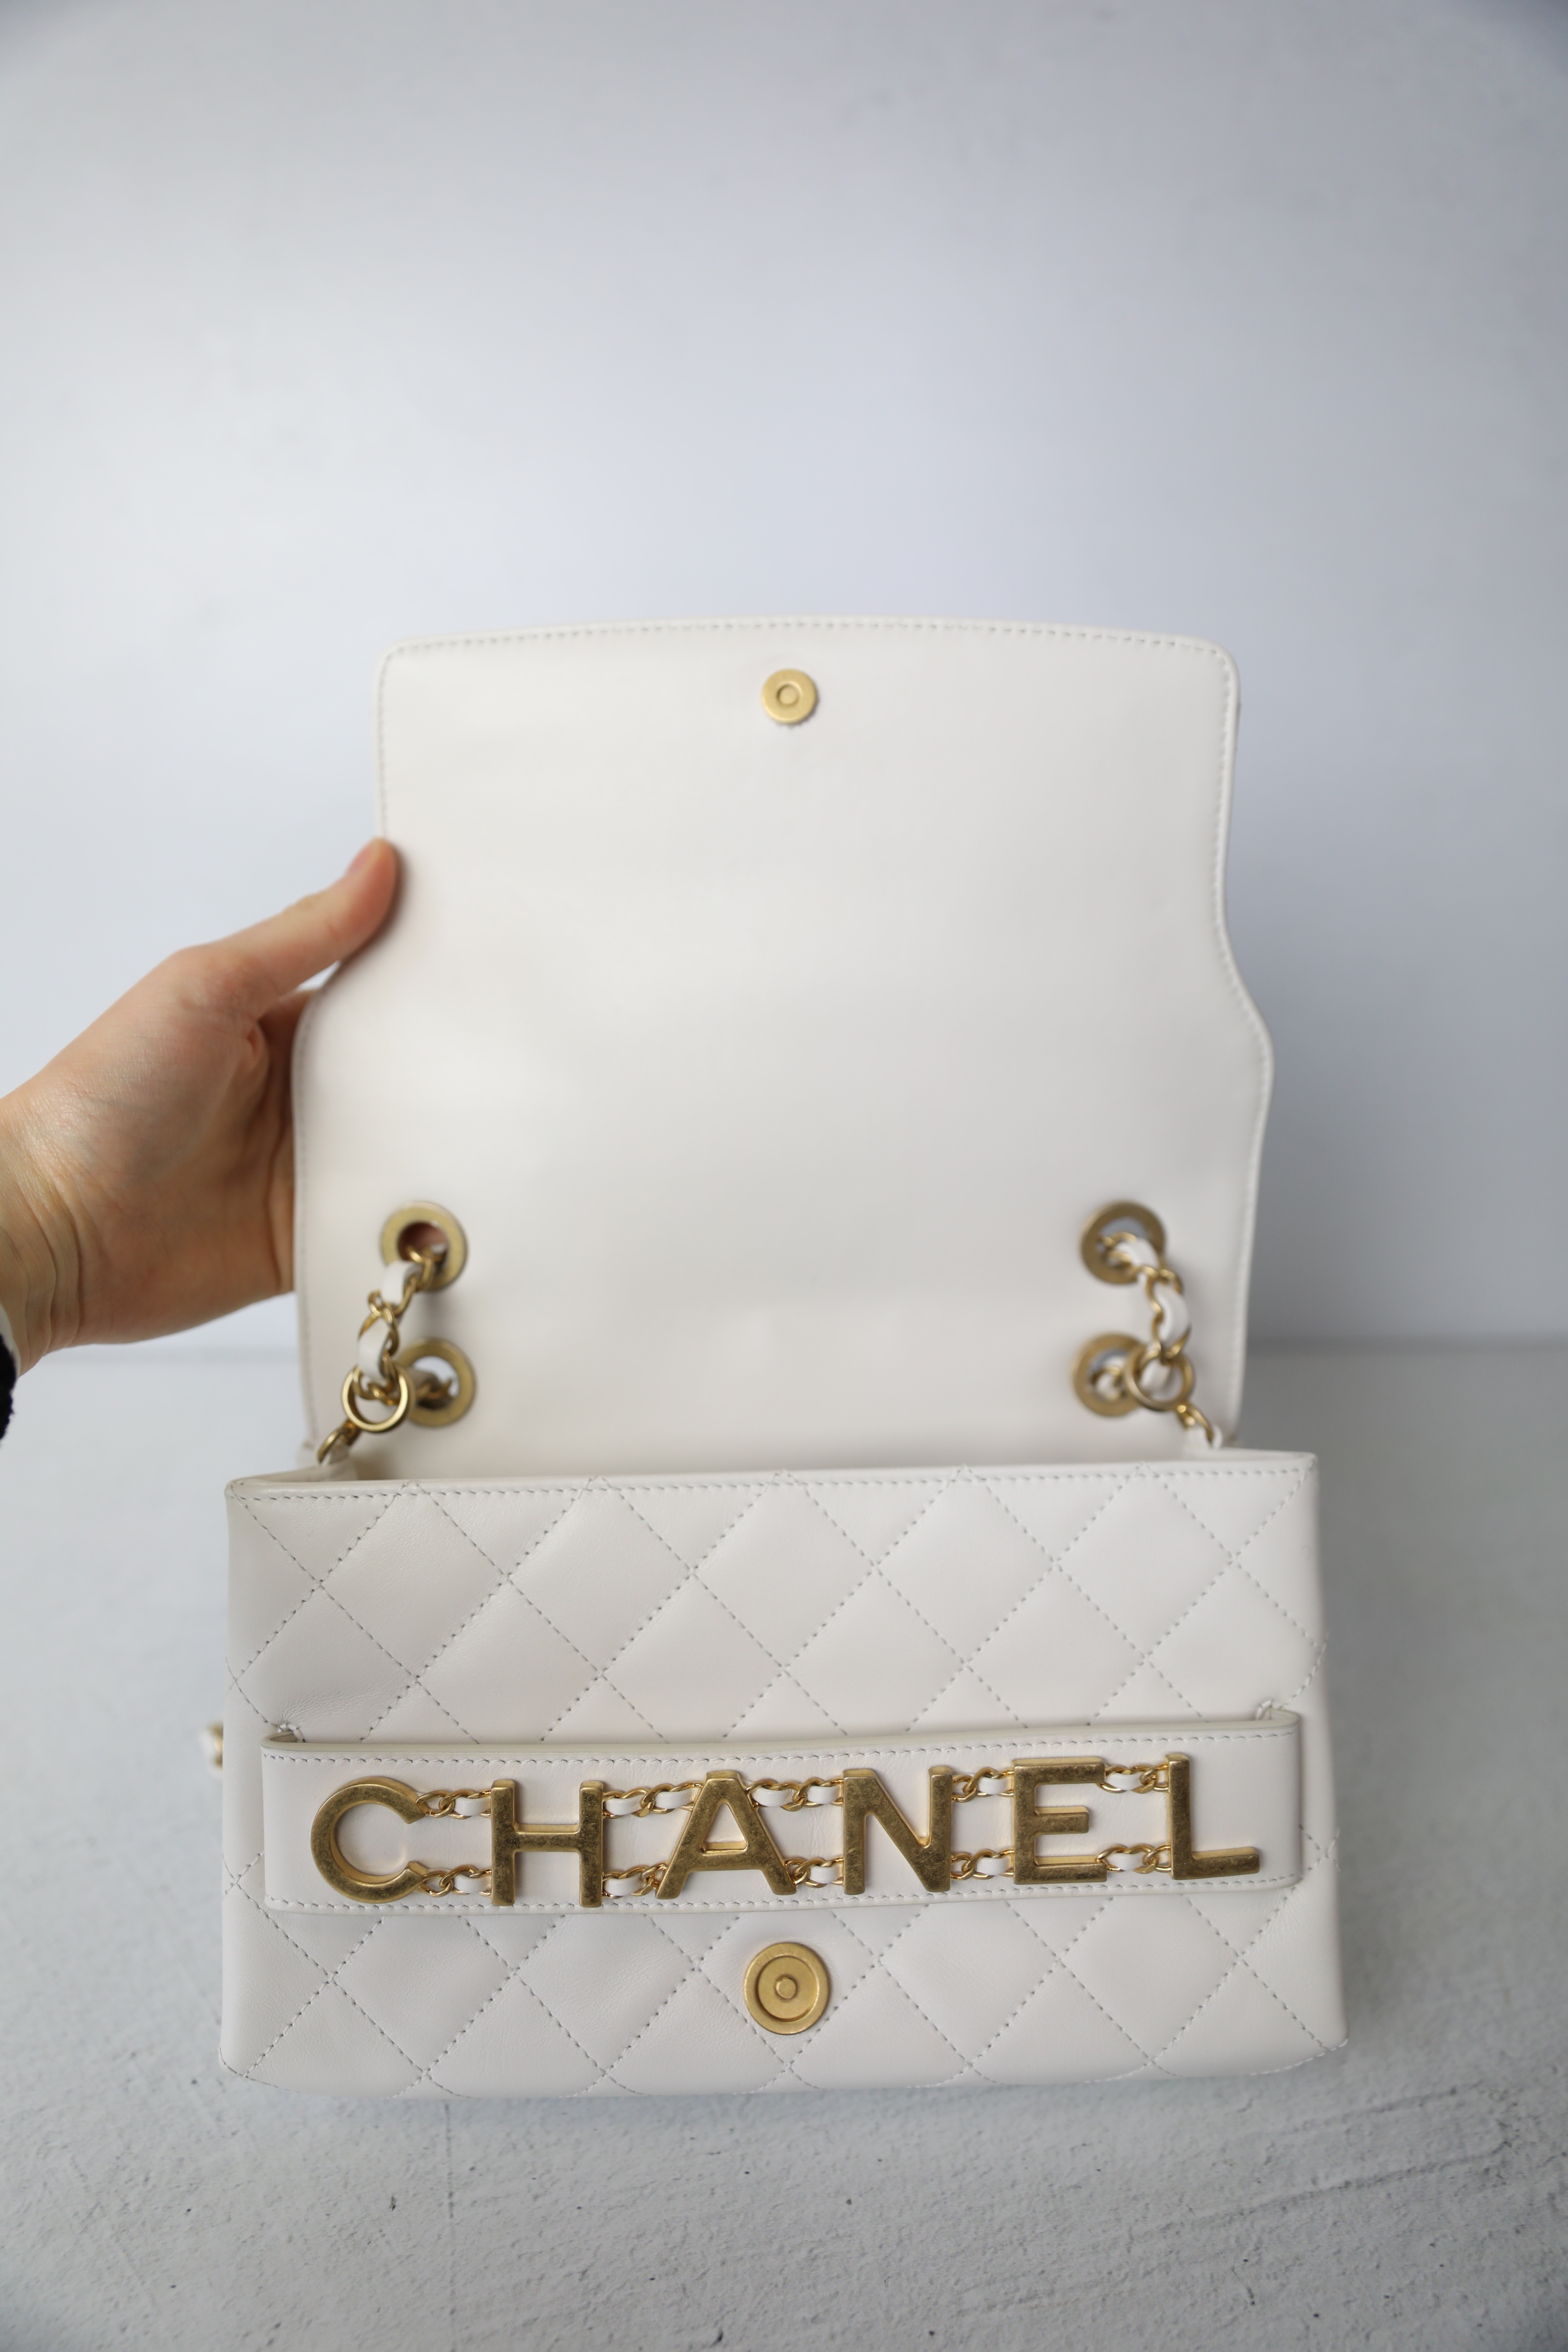 Chanel Reissue Mini, Blue Calfskin with Aged Gold Hardware, New in